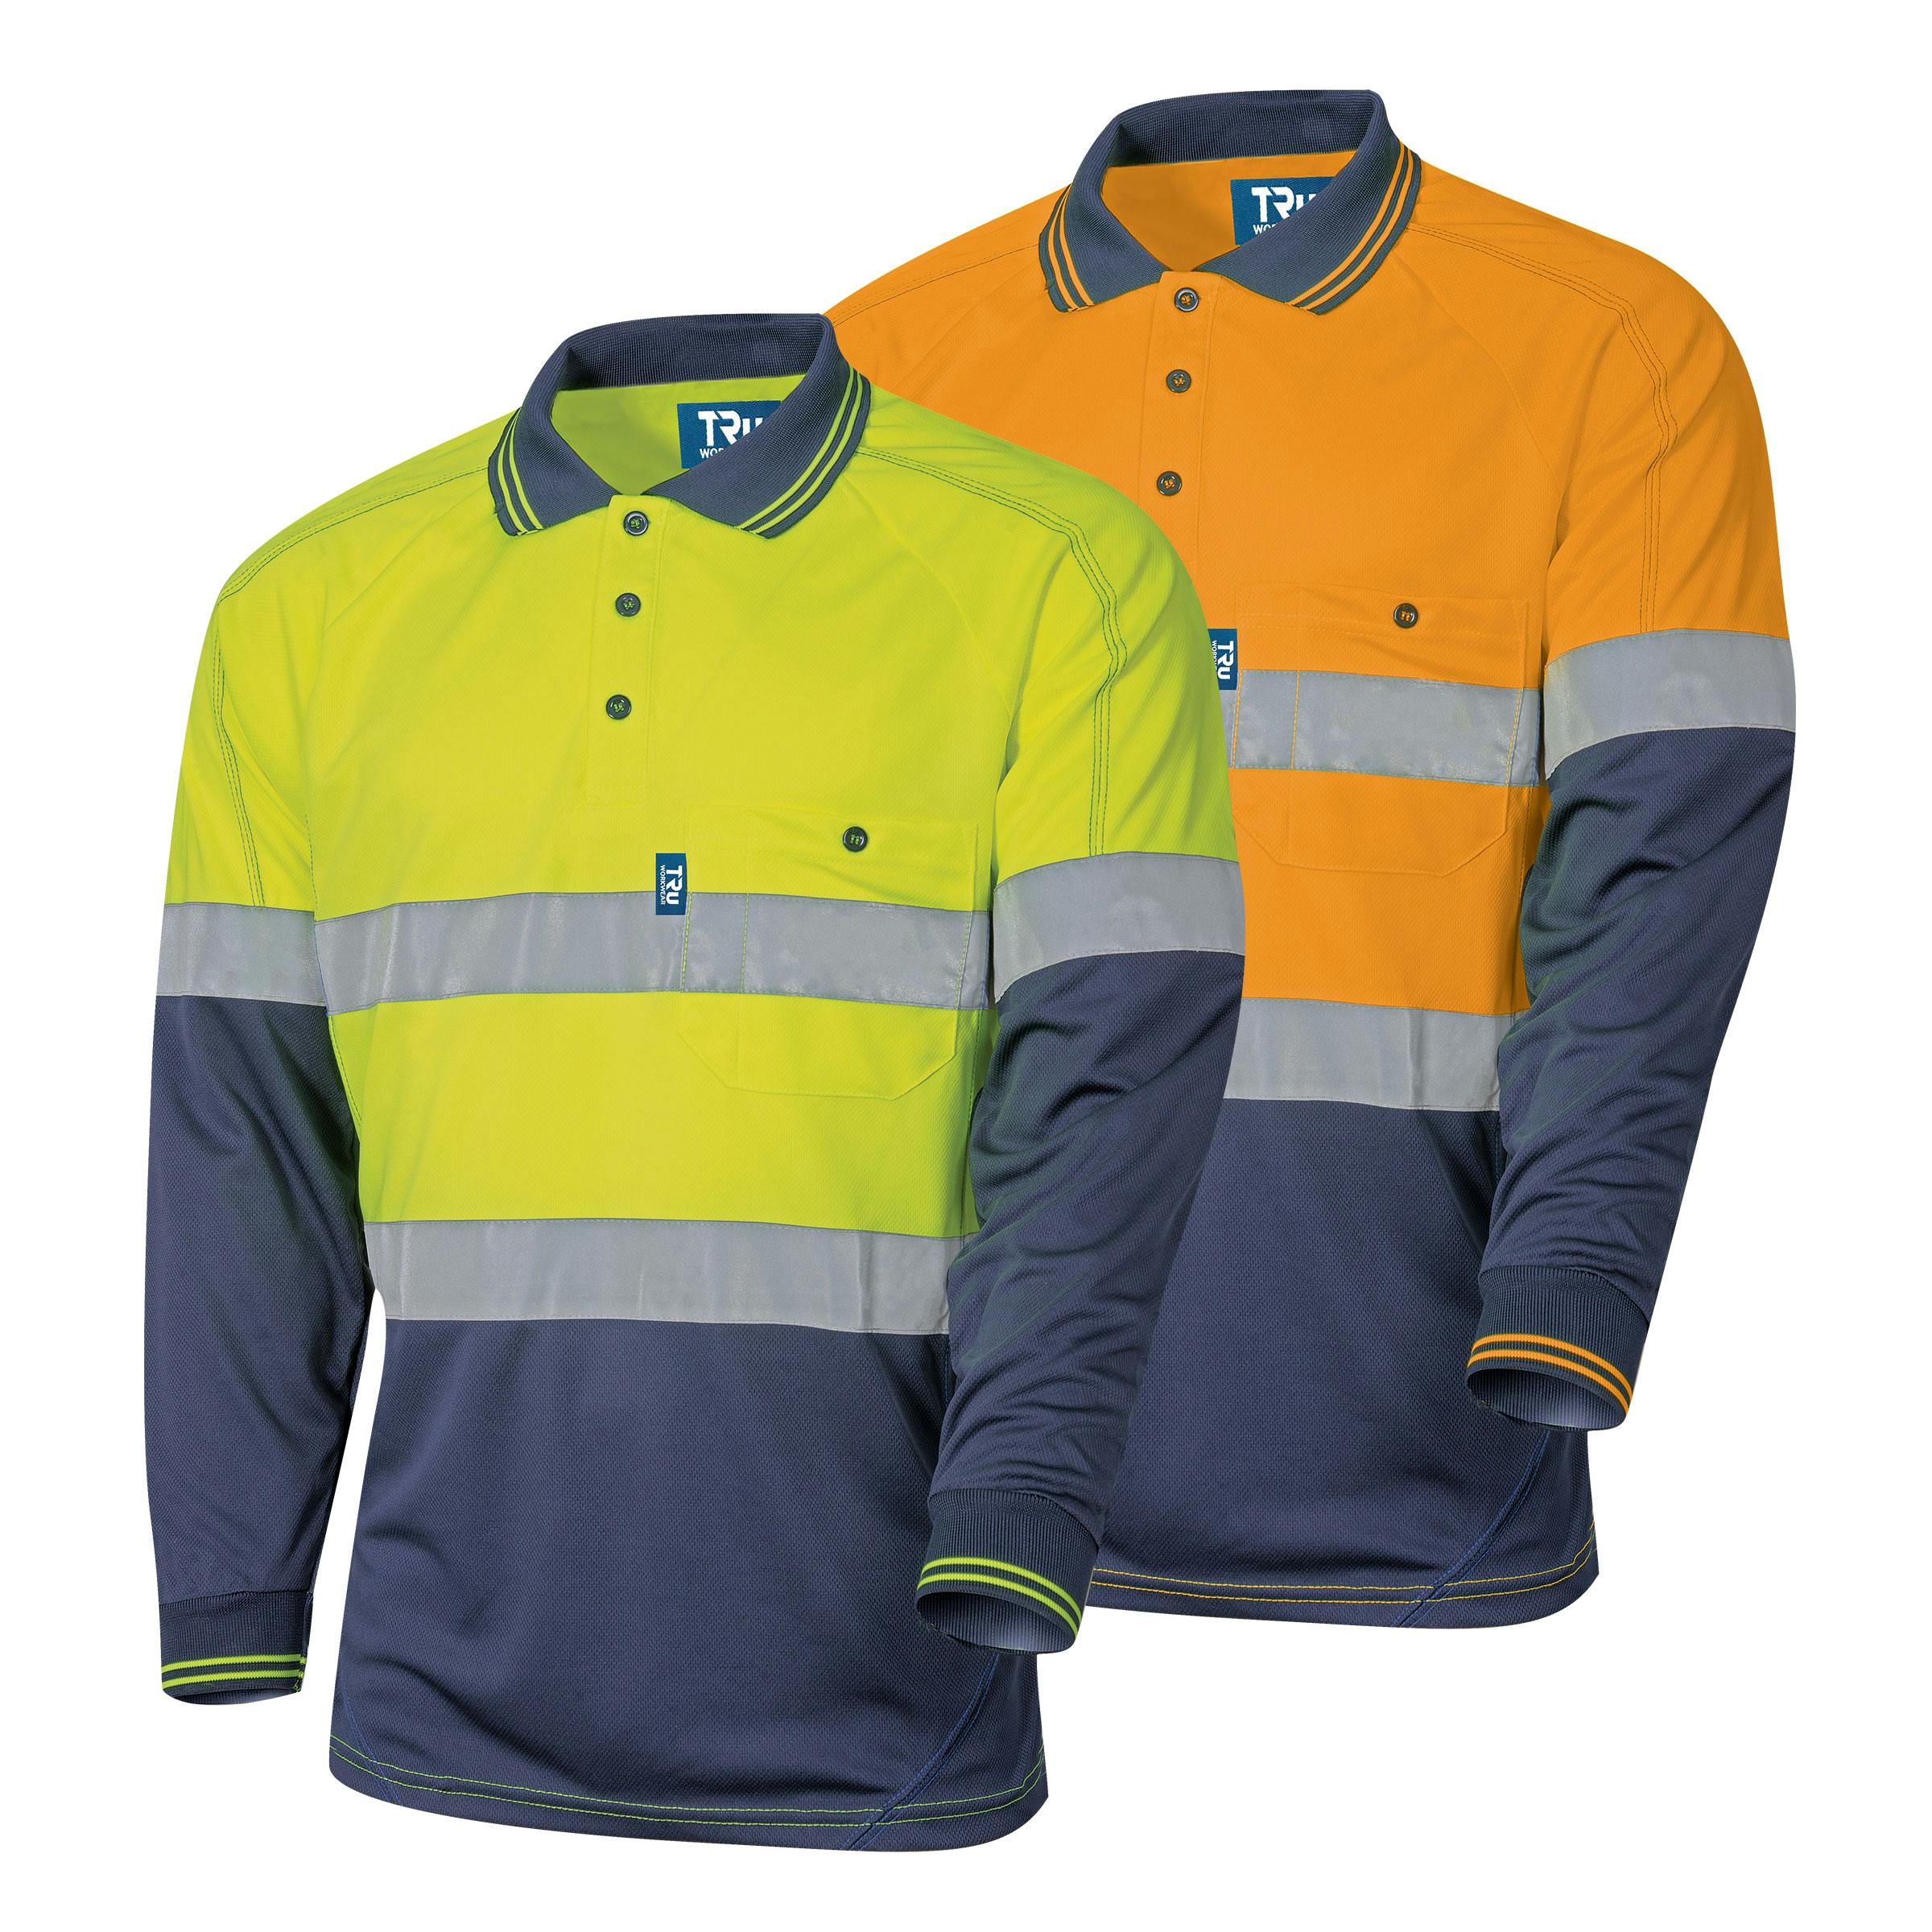 TRu Workwear Polo 175gsm Polyester Micromesh L/S Two Tone With Tru Reflective Tape